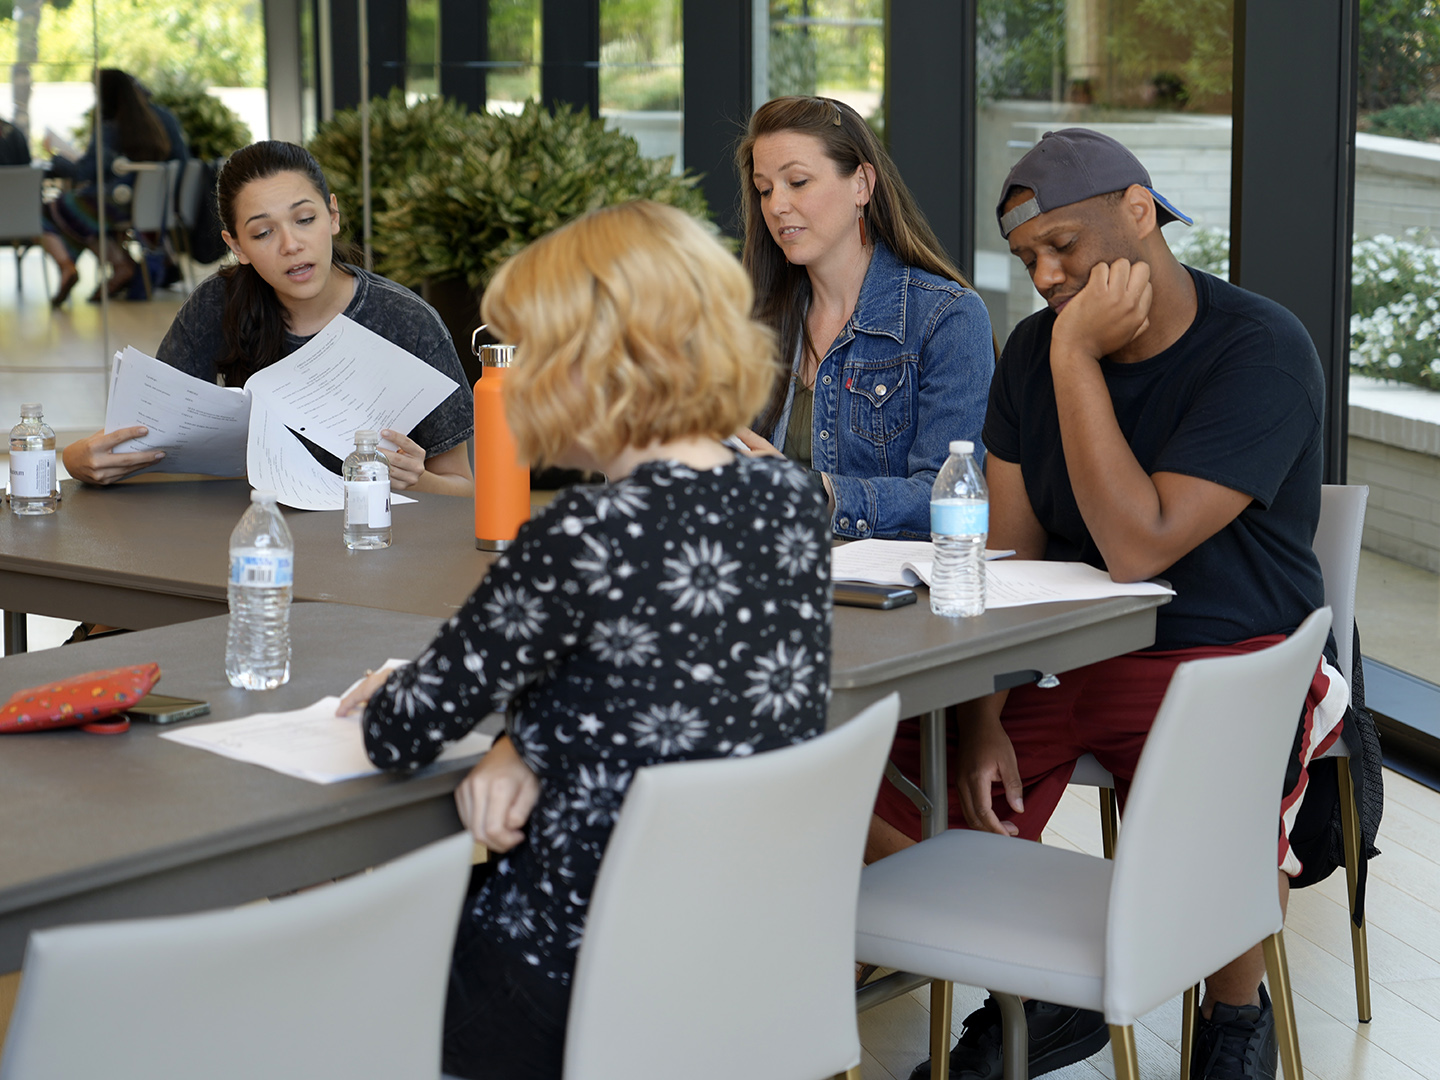 Photo of people gathered around a table reading scripts.